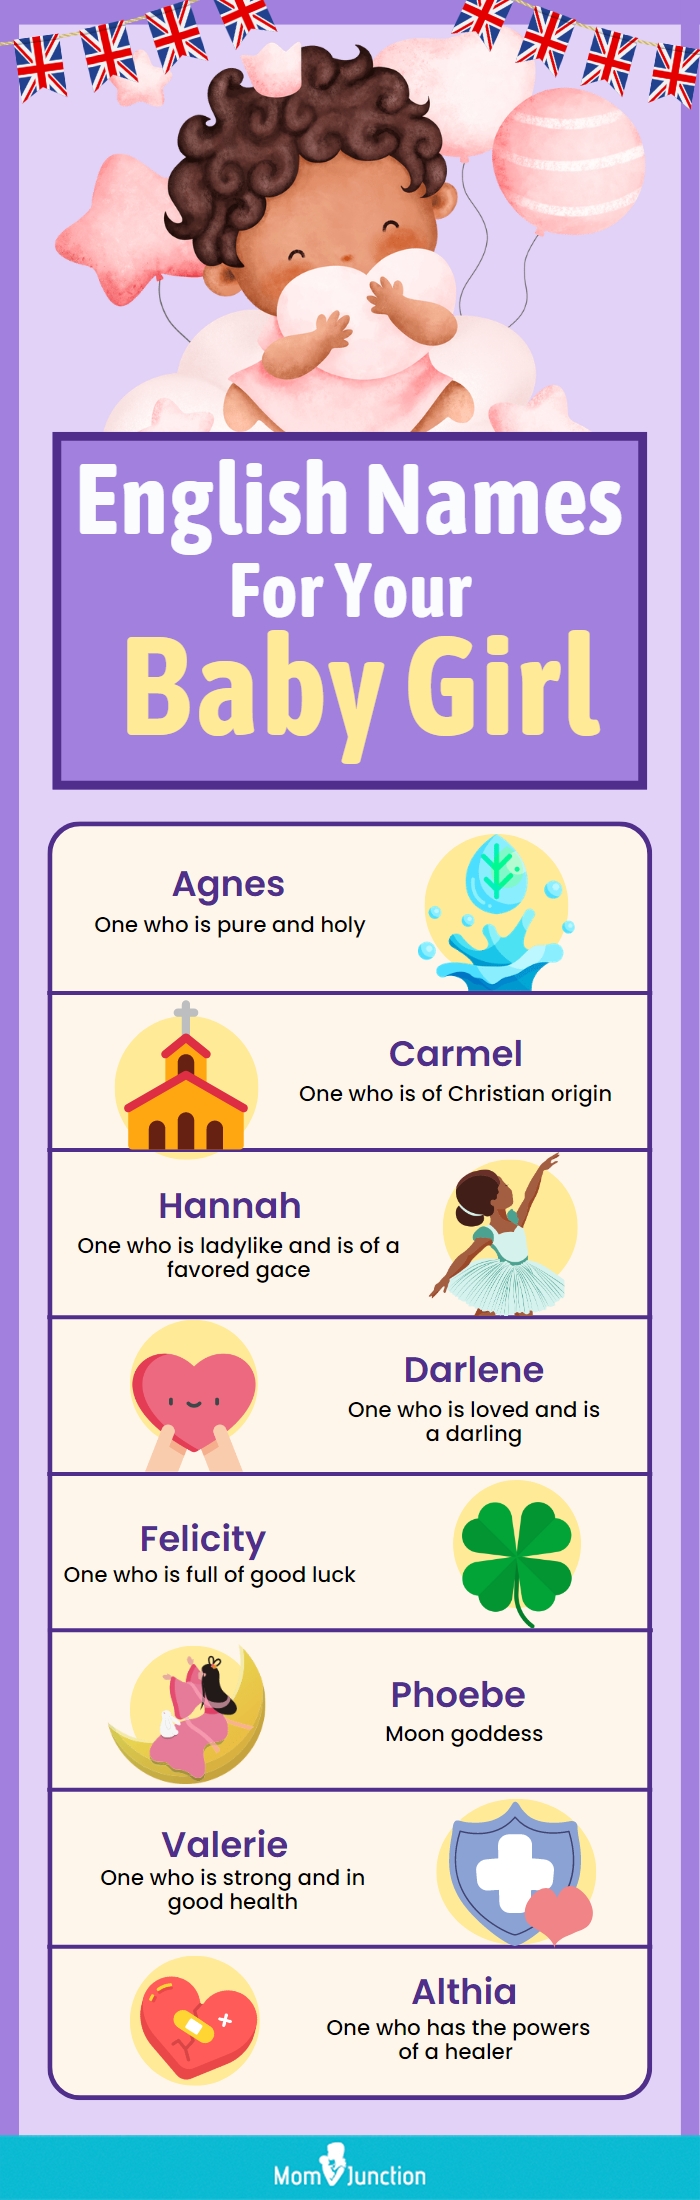 english names for your baby girl (infographic)